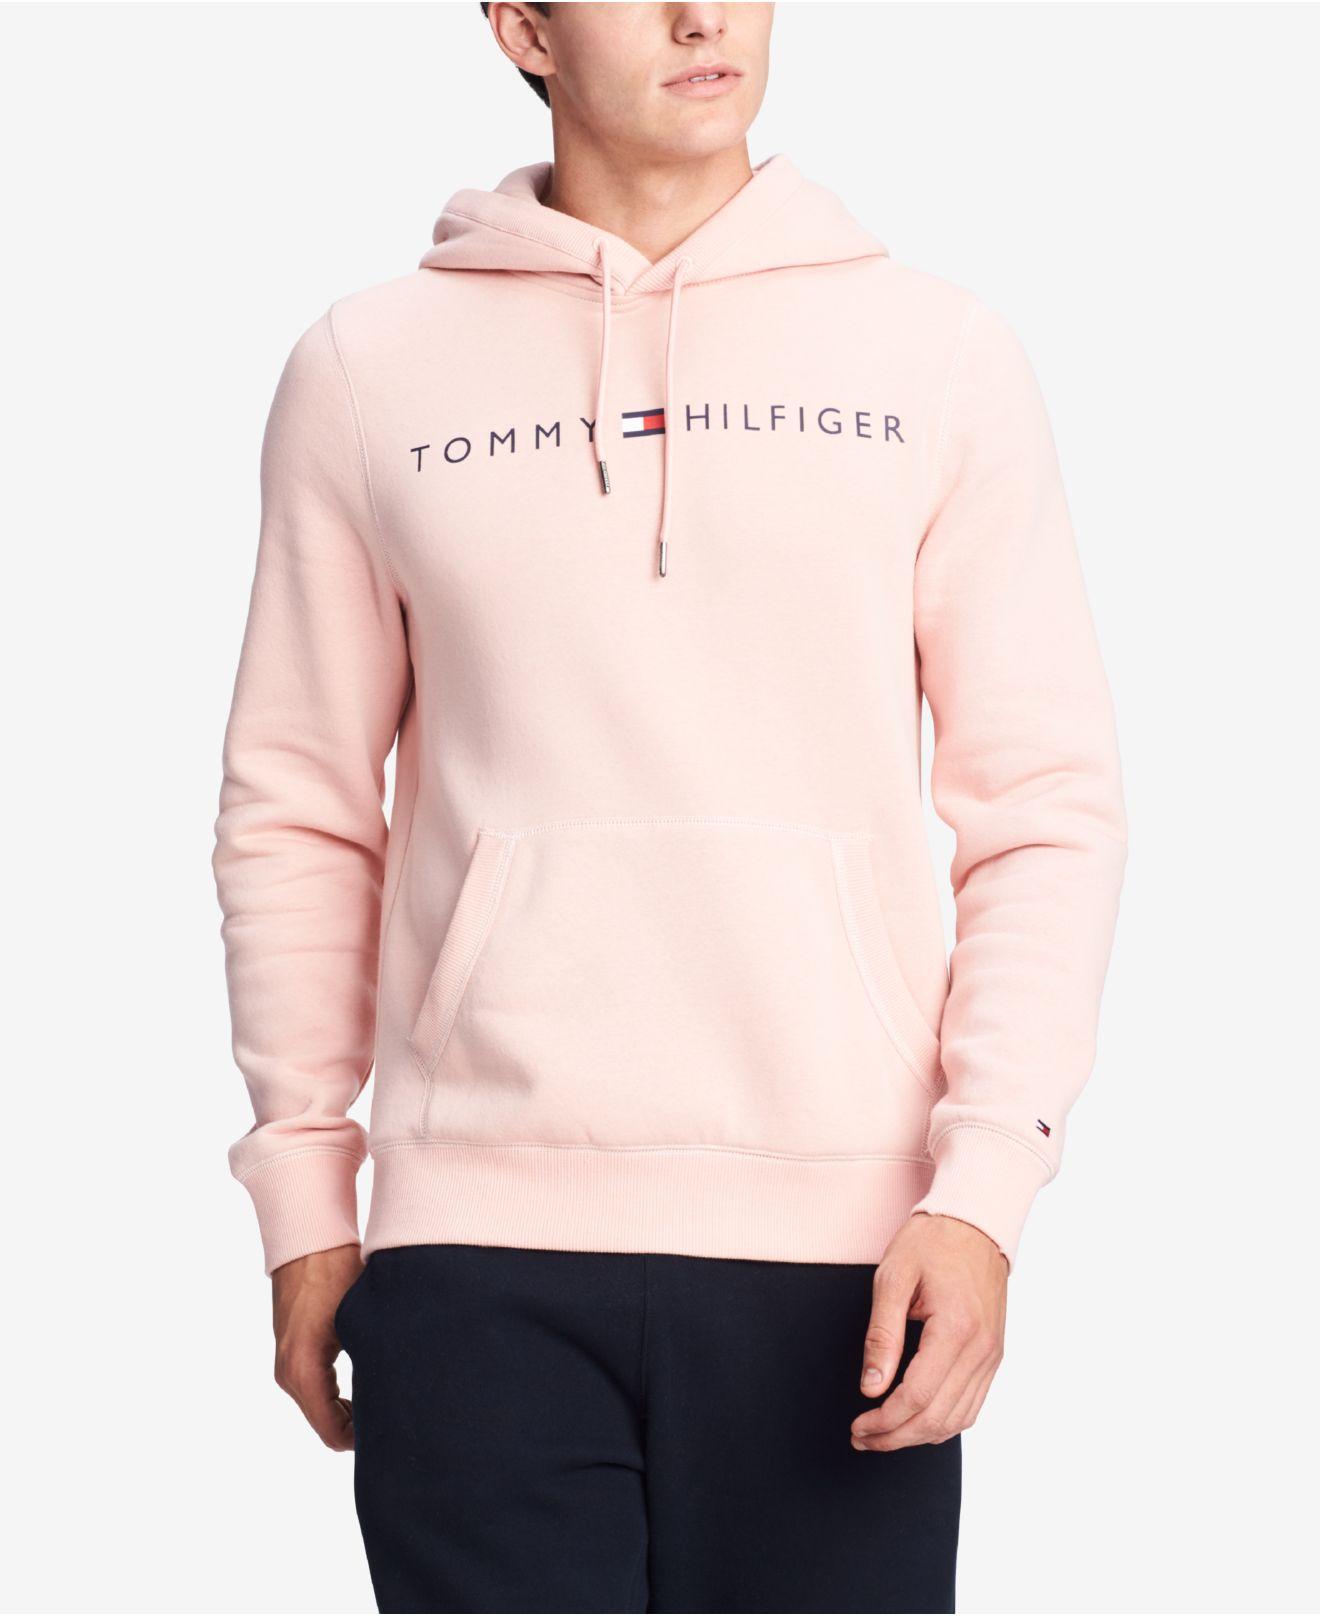 Pink Tommy Hilfiger Hoodie Mens Britain, SAVE 60% - aveclumiere.com